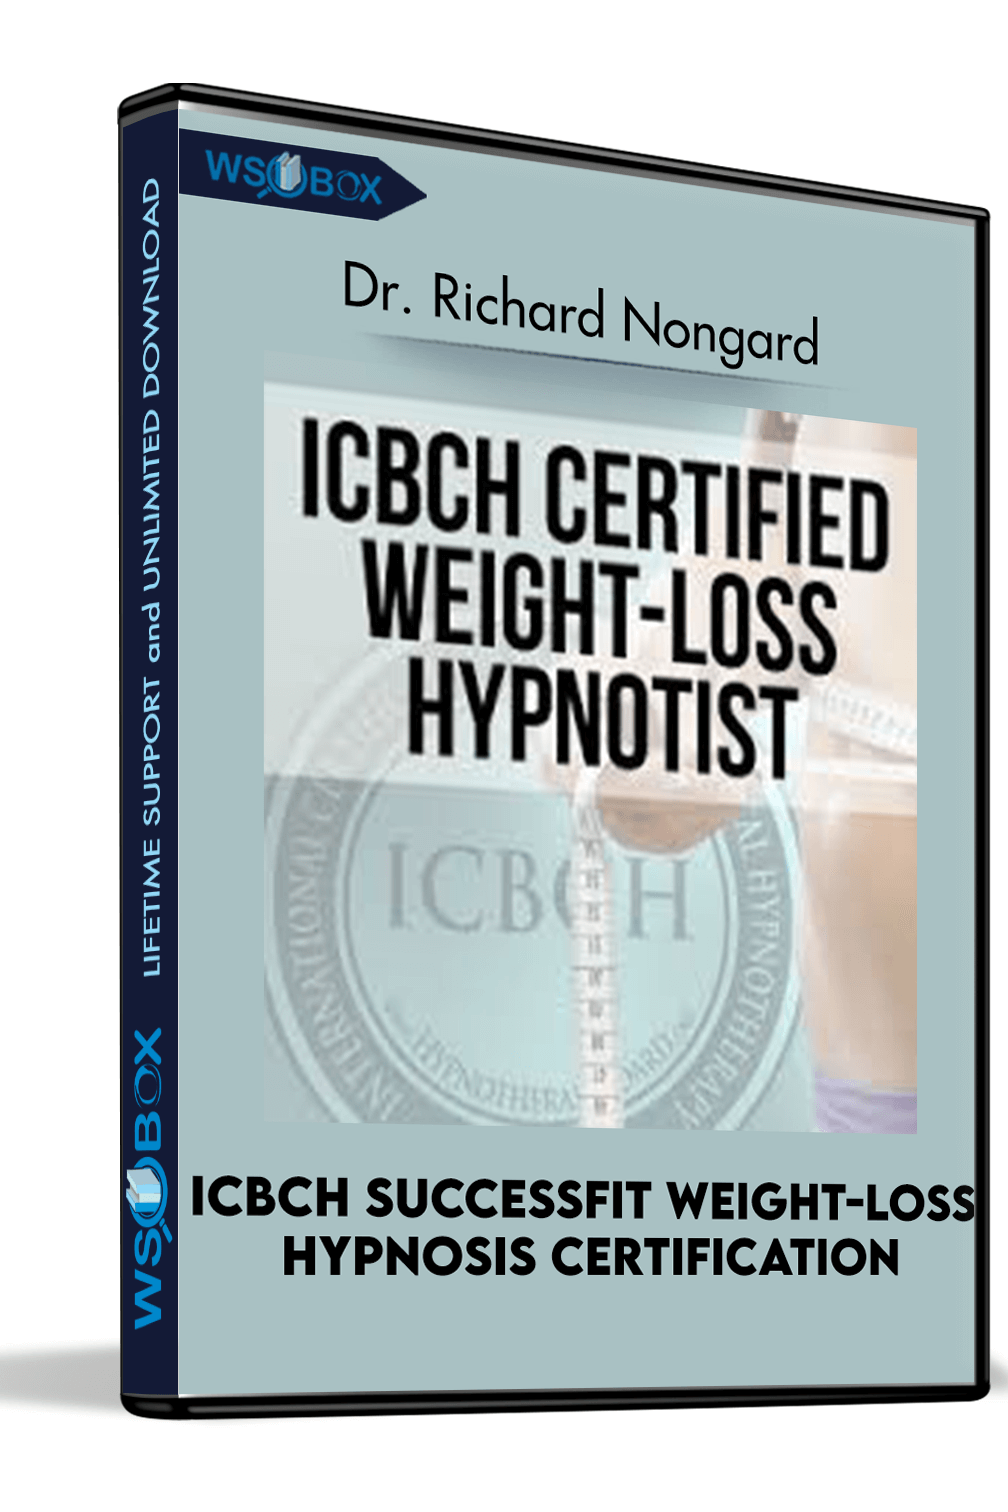 ICBCH SuccessFit Weight-Loss Hypnosis Certification – Dr. Richard Nongard